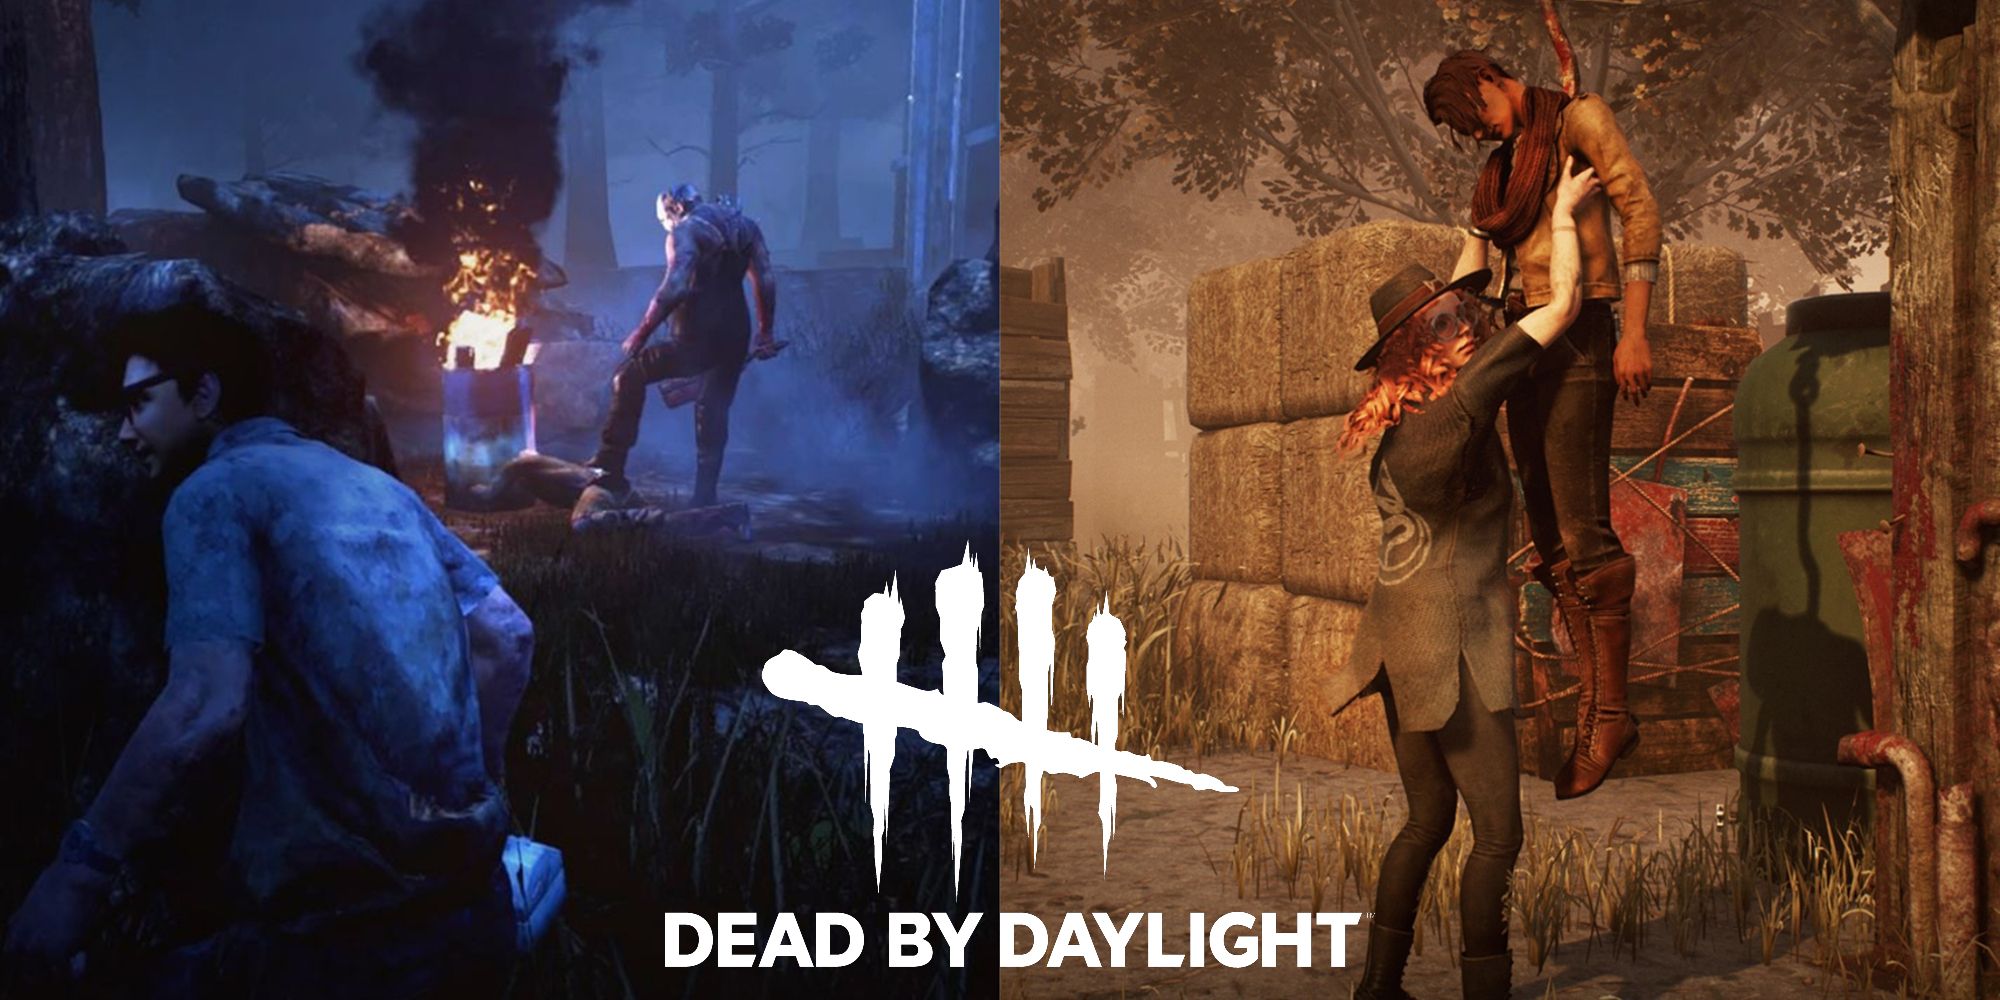 Split image of Dwight hiding from the Trapper and Meg unhooking another survivor in Dead By Daylight